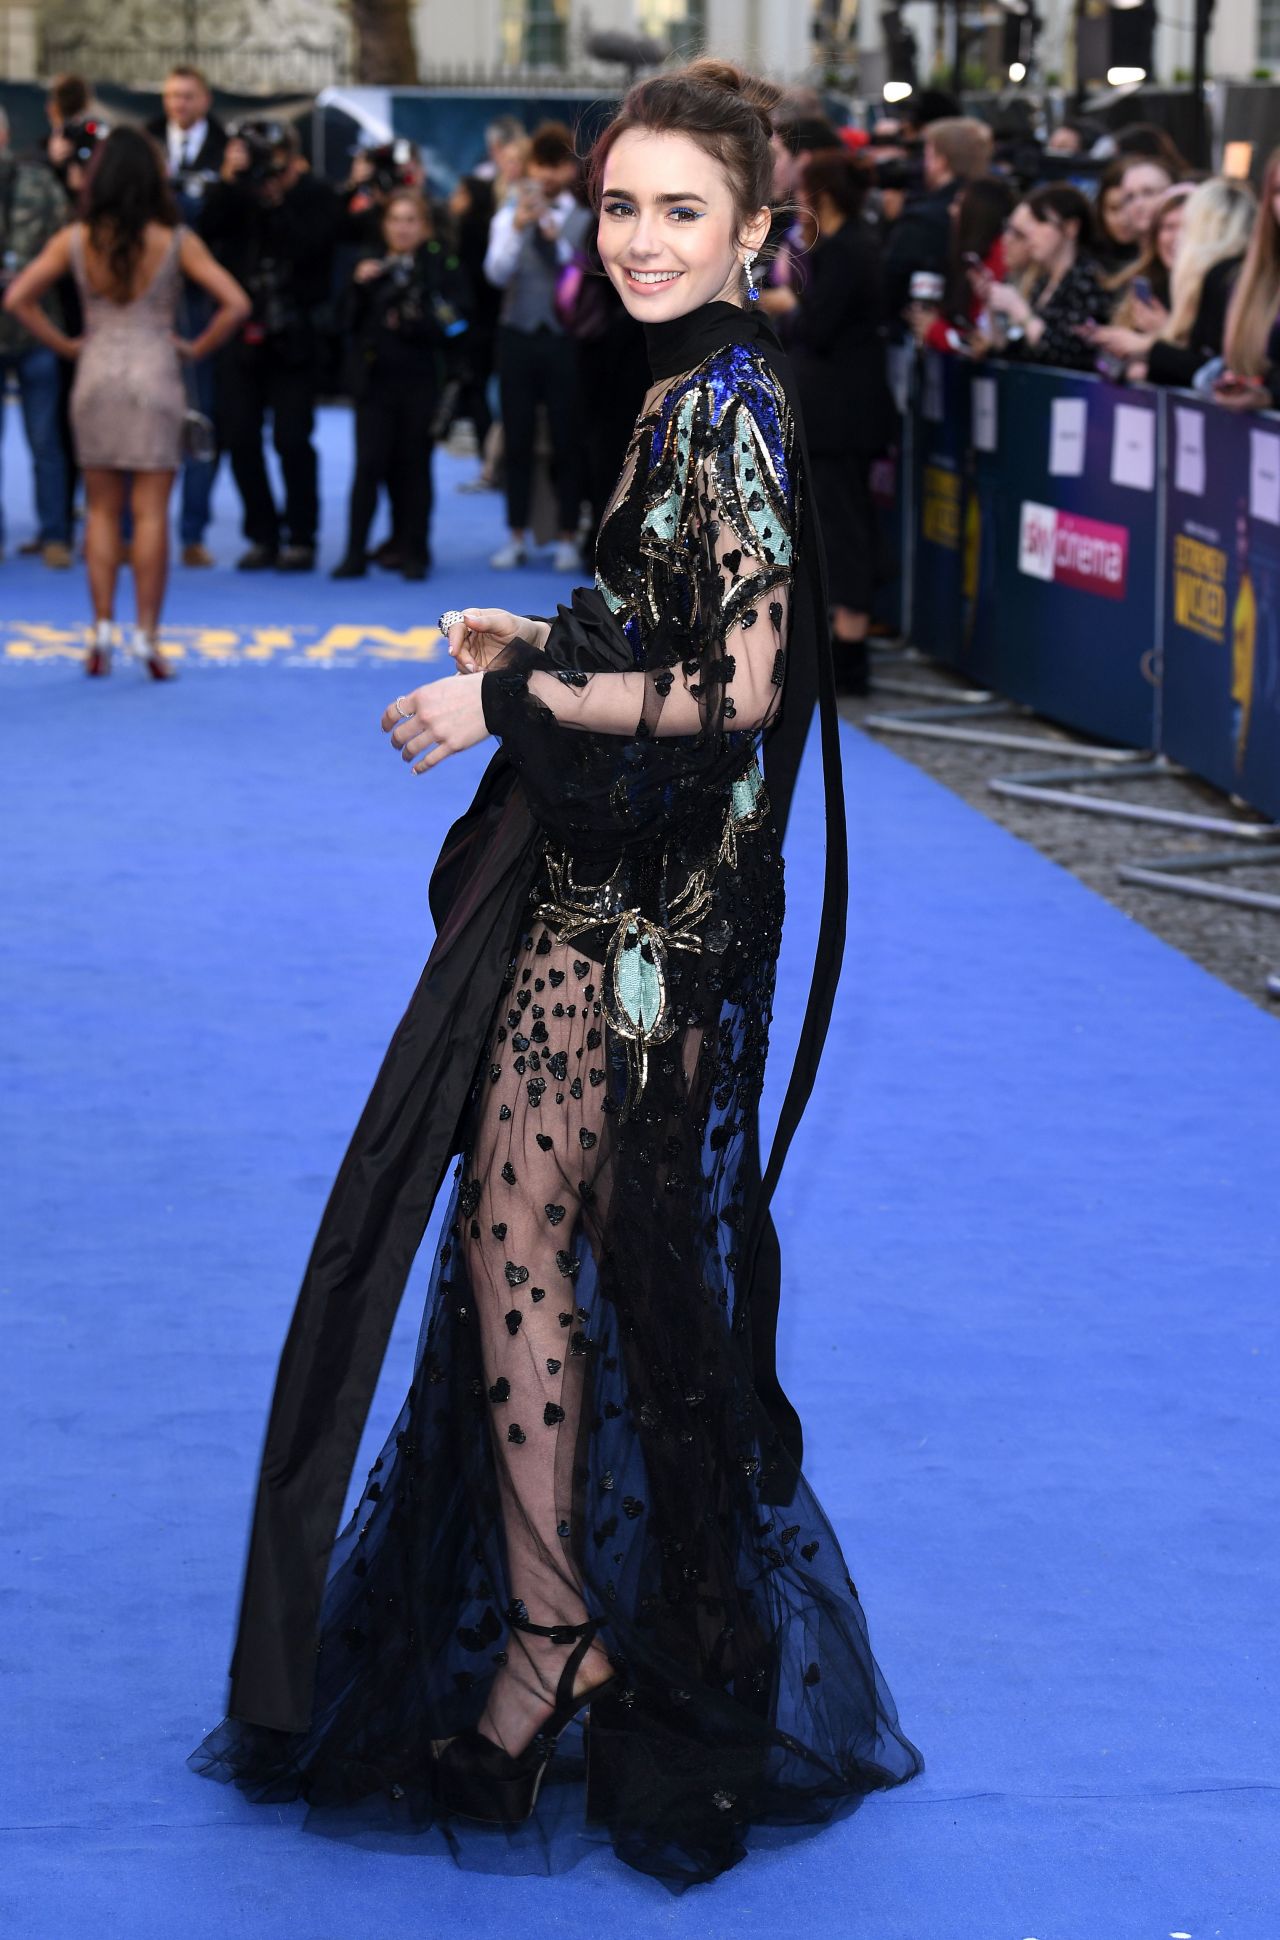 https://celebmafia.com/wp-content/uploads/2019/04/lily-collins-extremely-wicked-shockingly-evil-and-vile-premiere-in-london-8.jpg